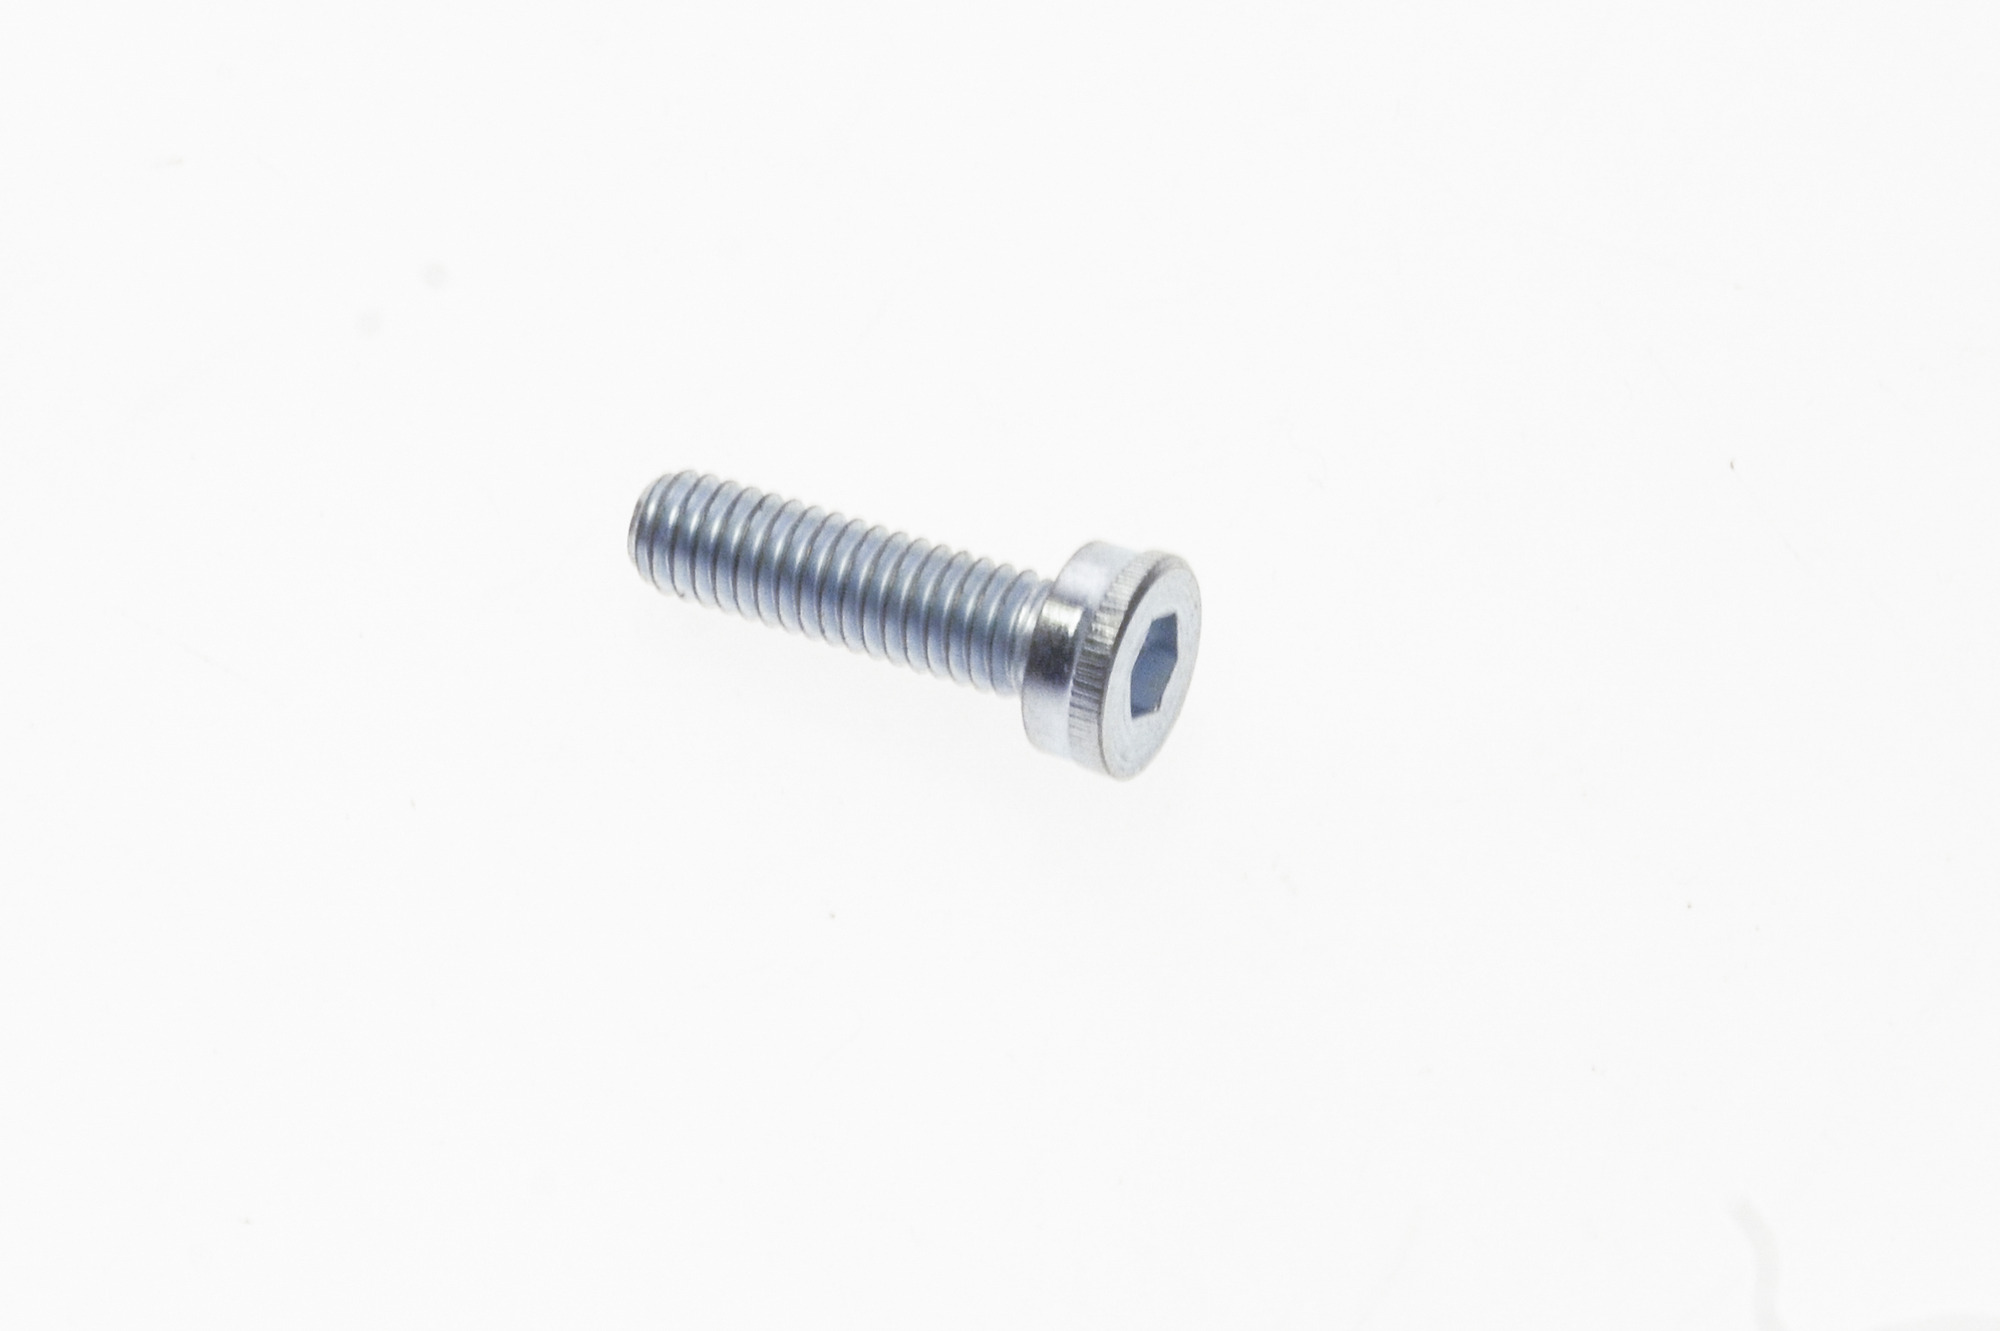 NORCO GIZMO Mounting Screw M4X14mm